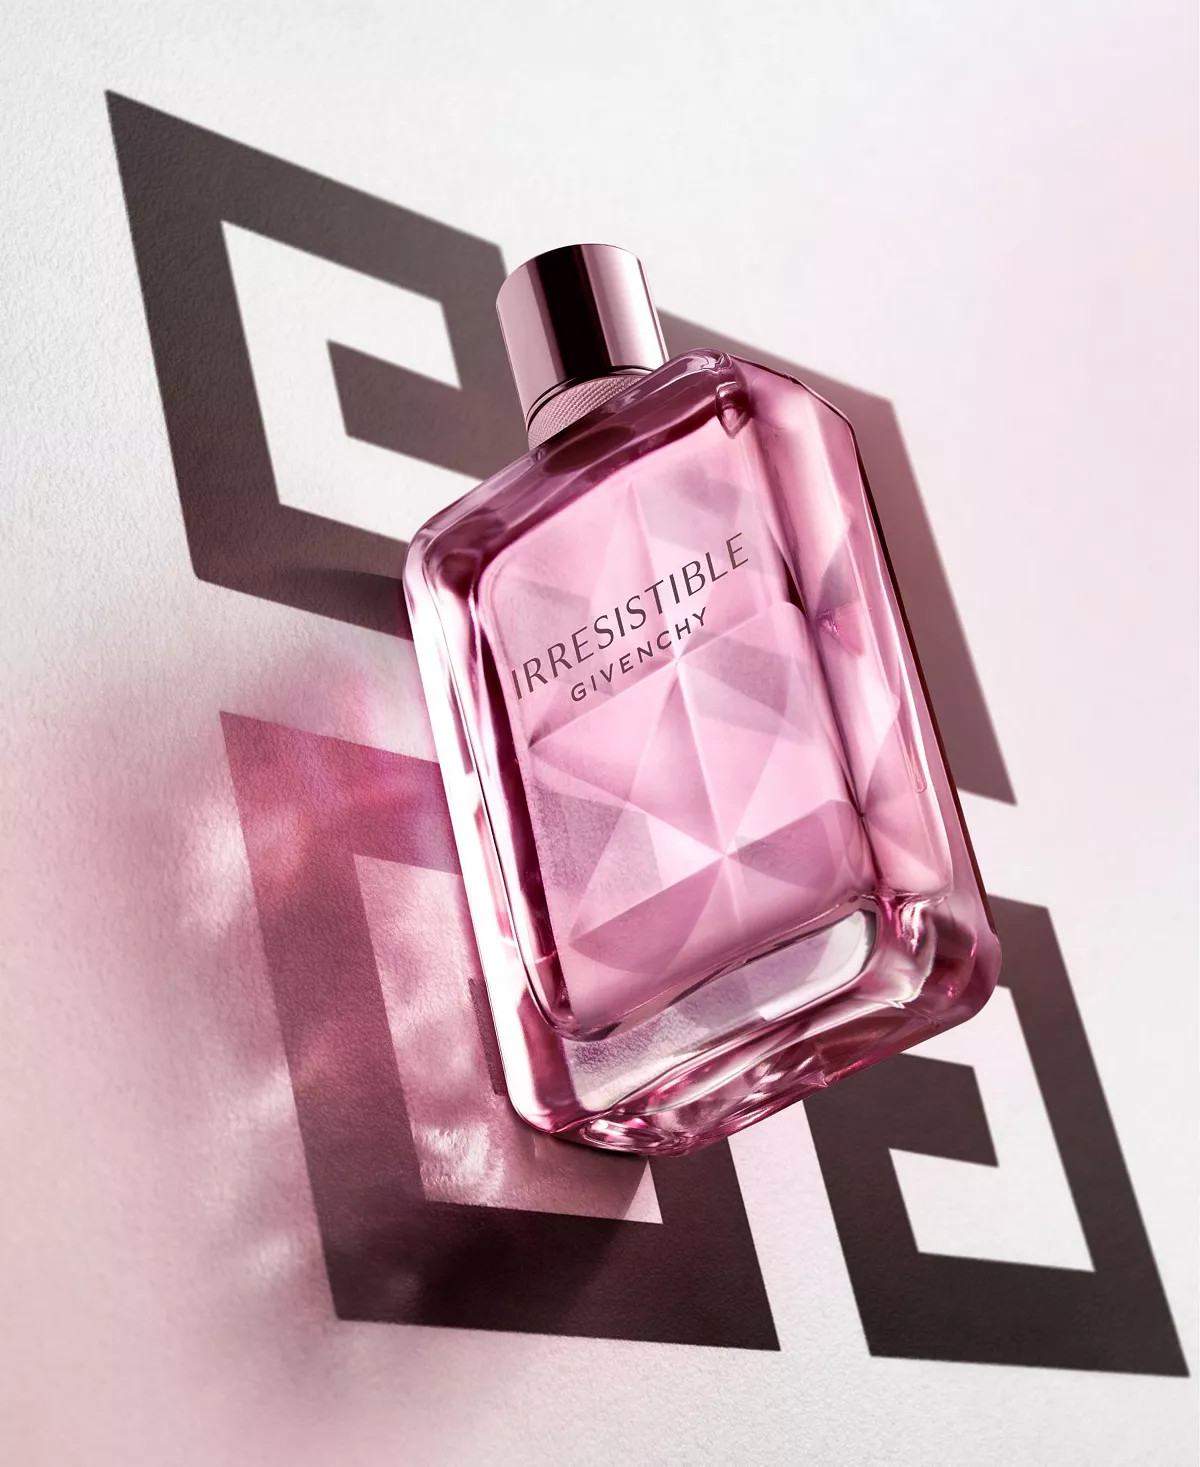 Givenchy - Irresistible Givenchy Very Floral ~ New Fragrances